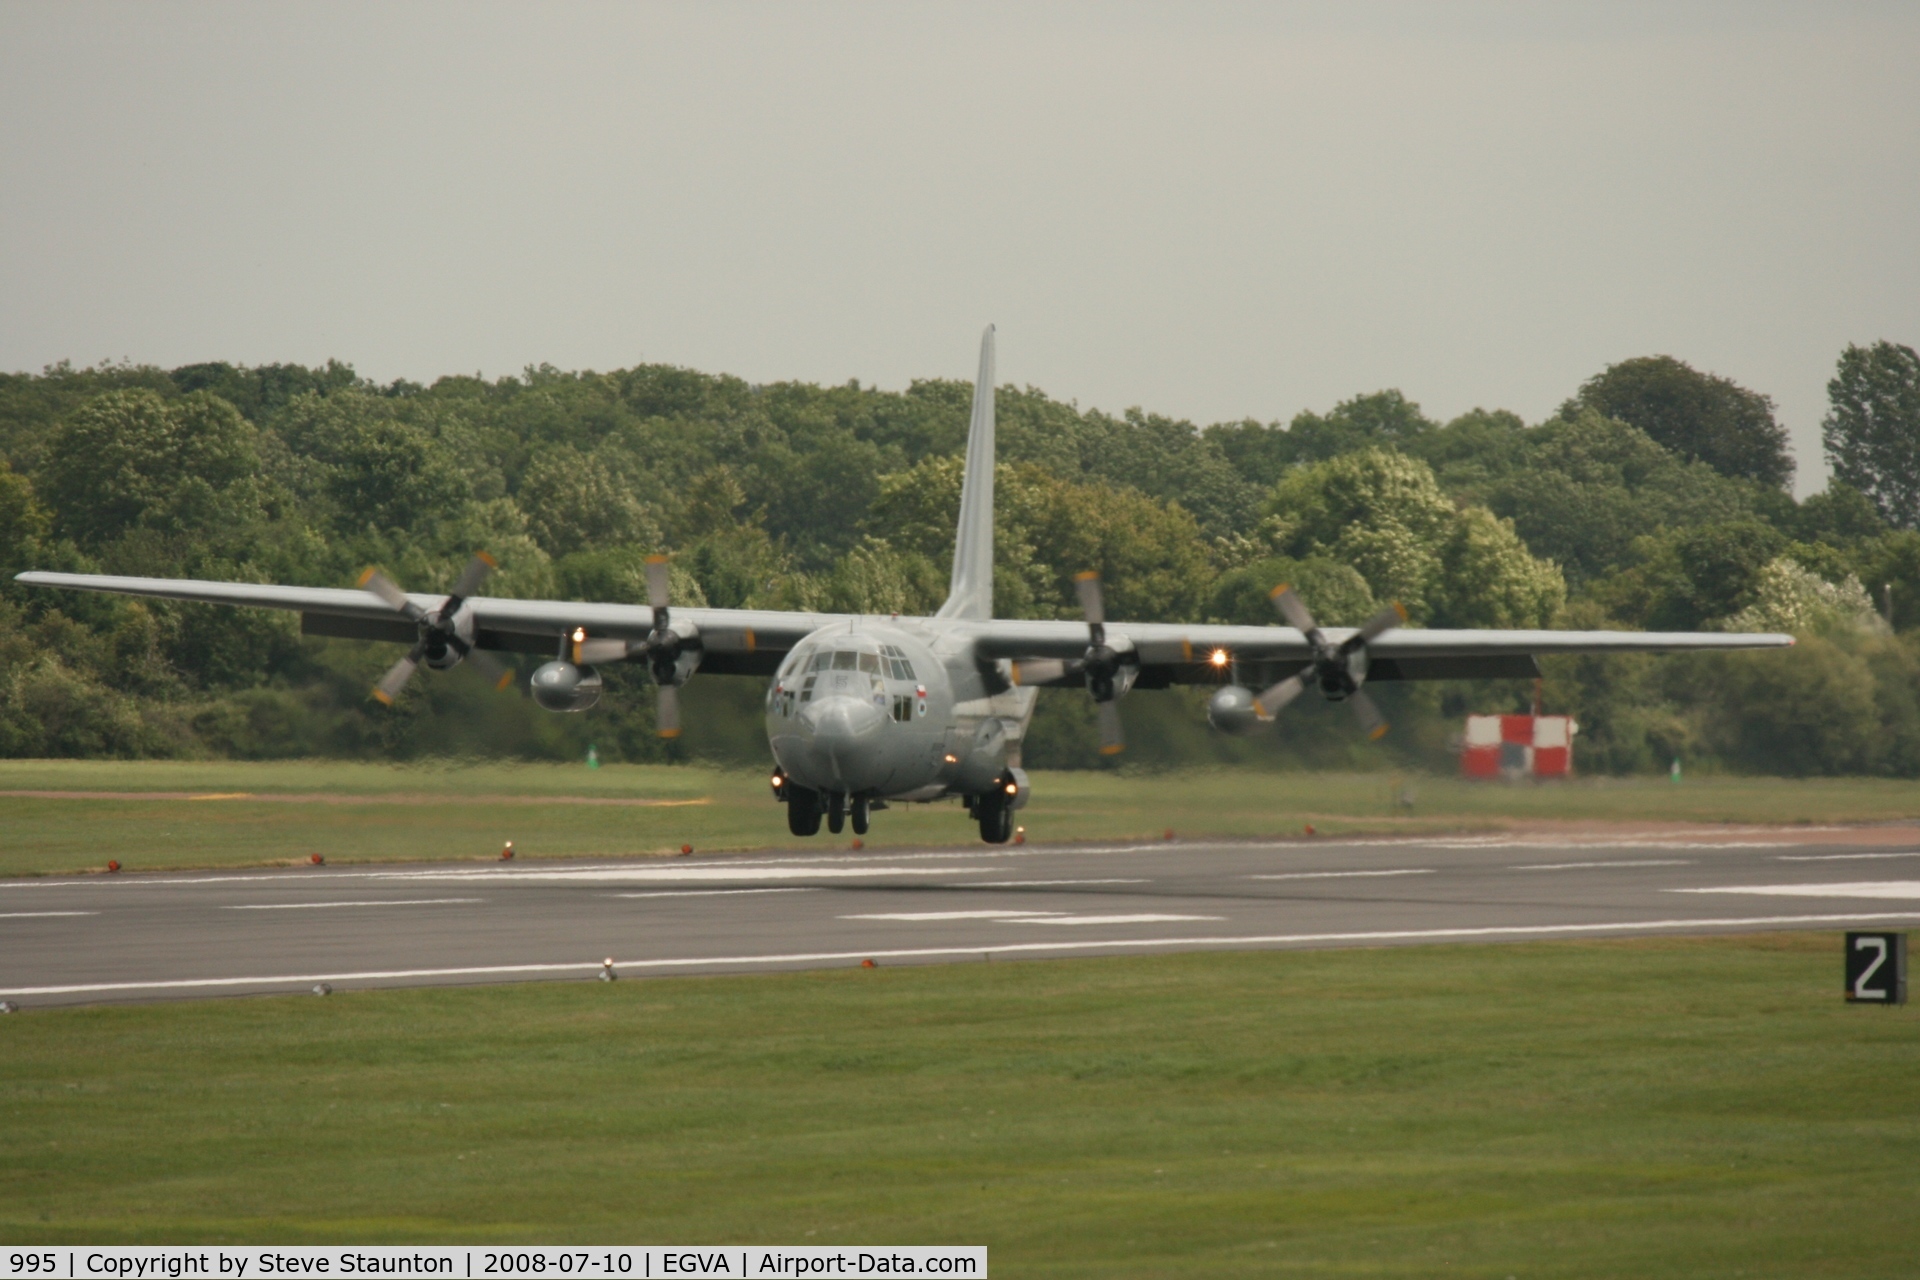 995, 1971 Lockheed C-130H Hercules C/N 382-4453, Taken at the Royal International Air Tattoo 2008 during arrivals and departures (show days cancelled due to bad weather)